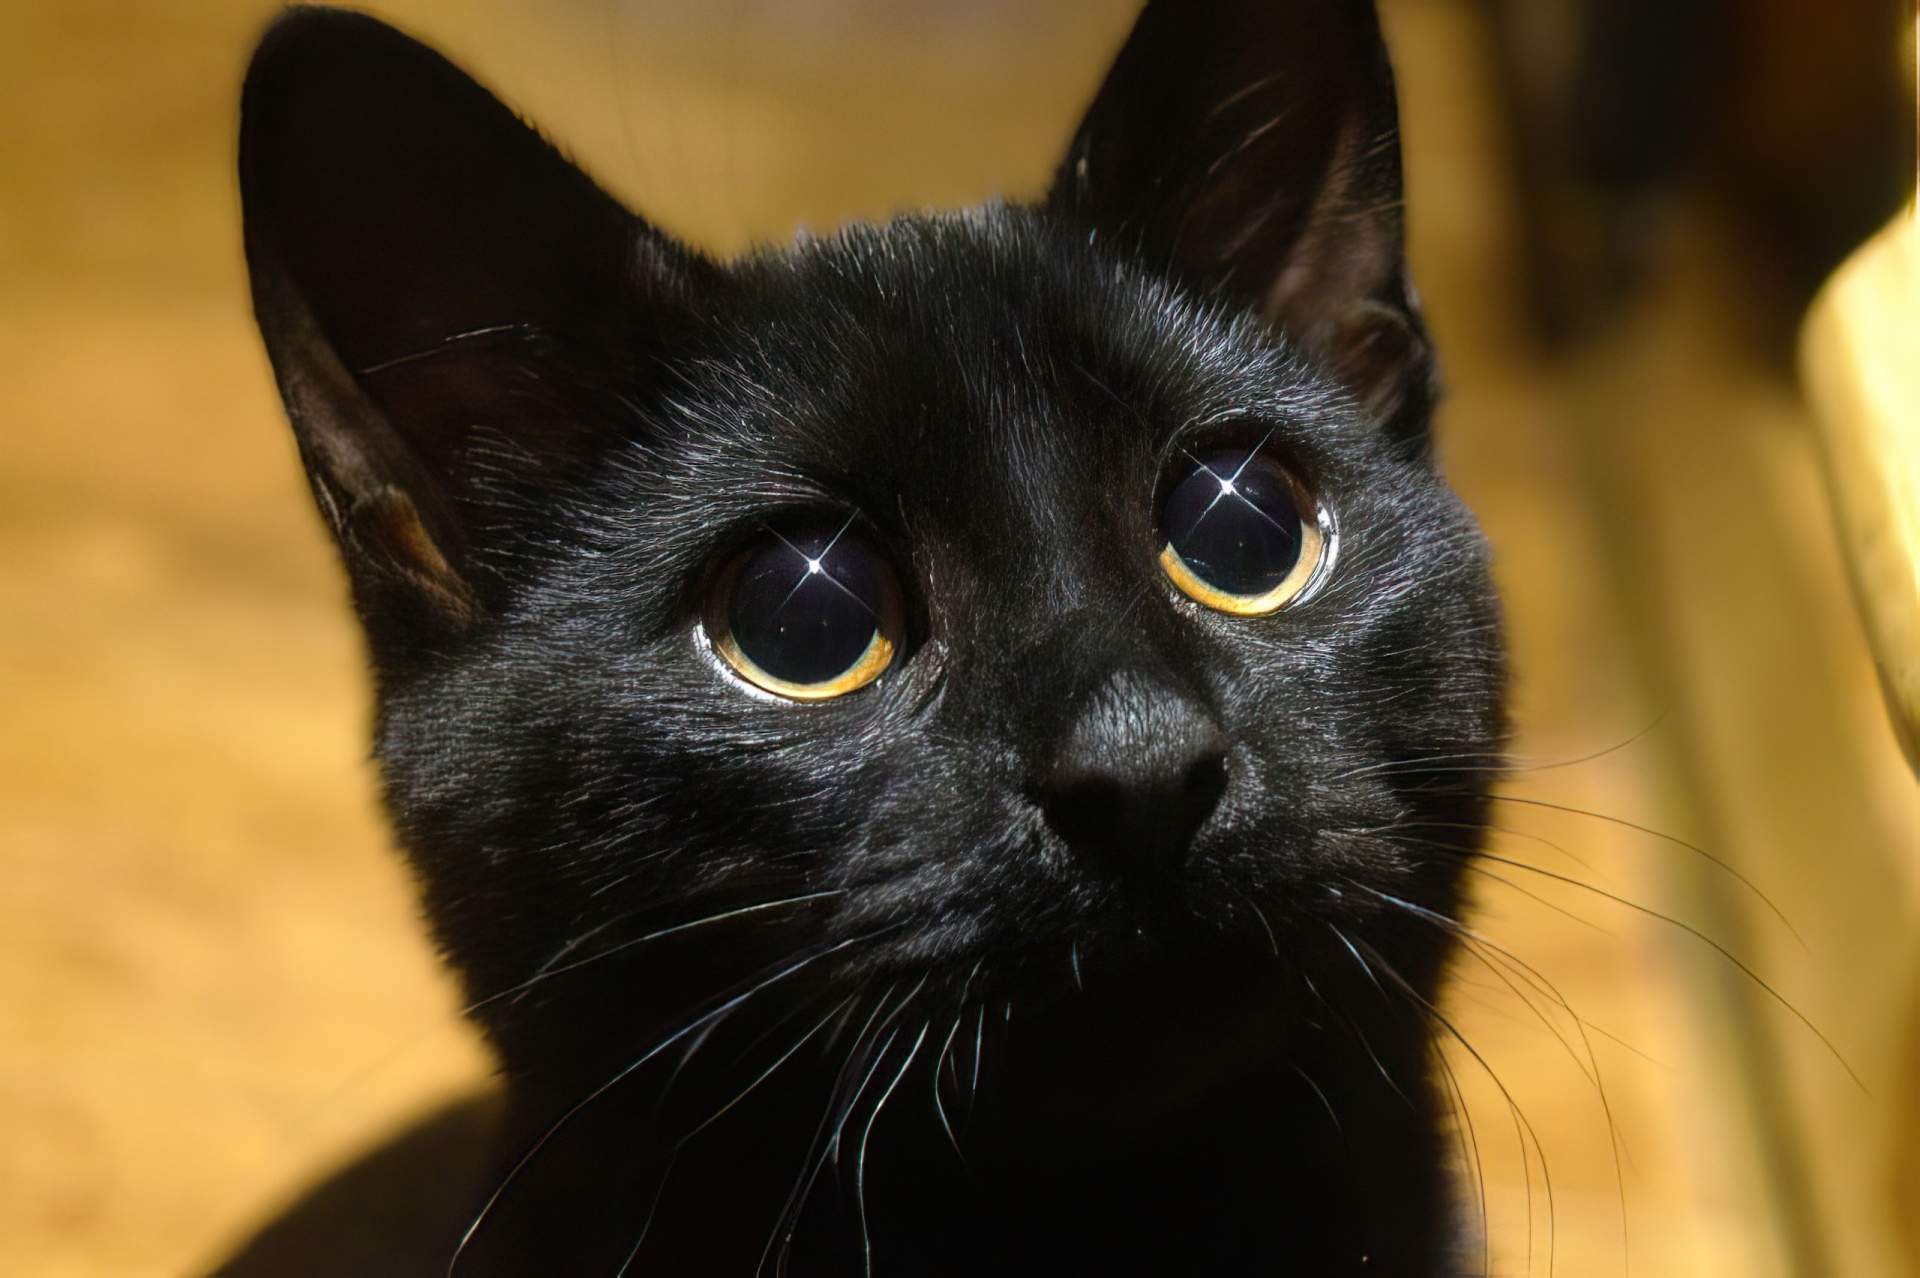 A close-up of a black cat with sparkling eyes